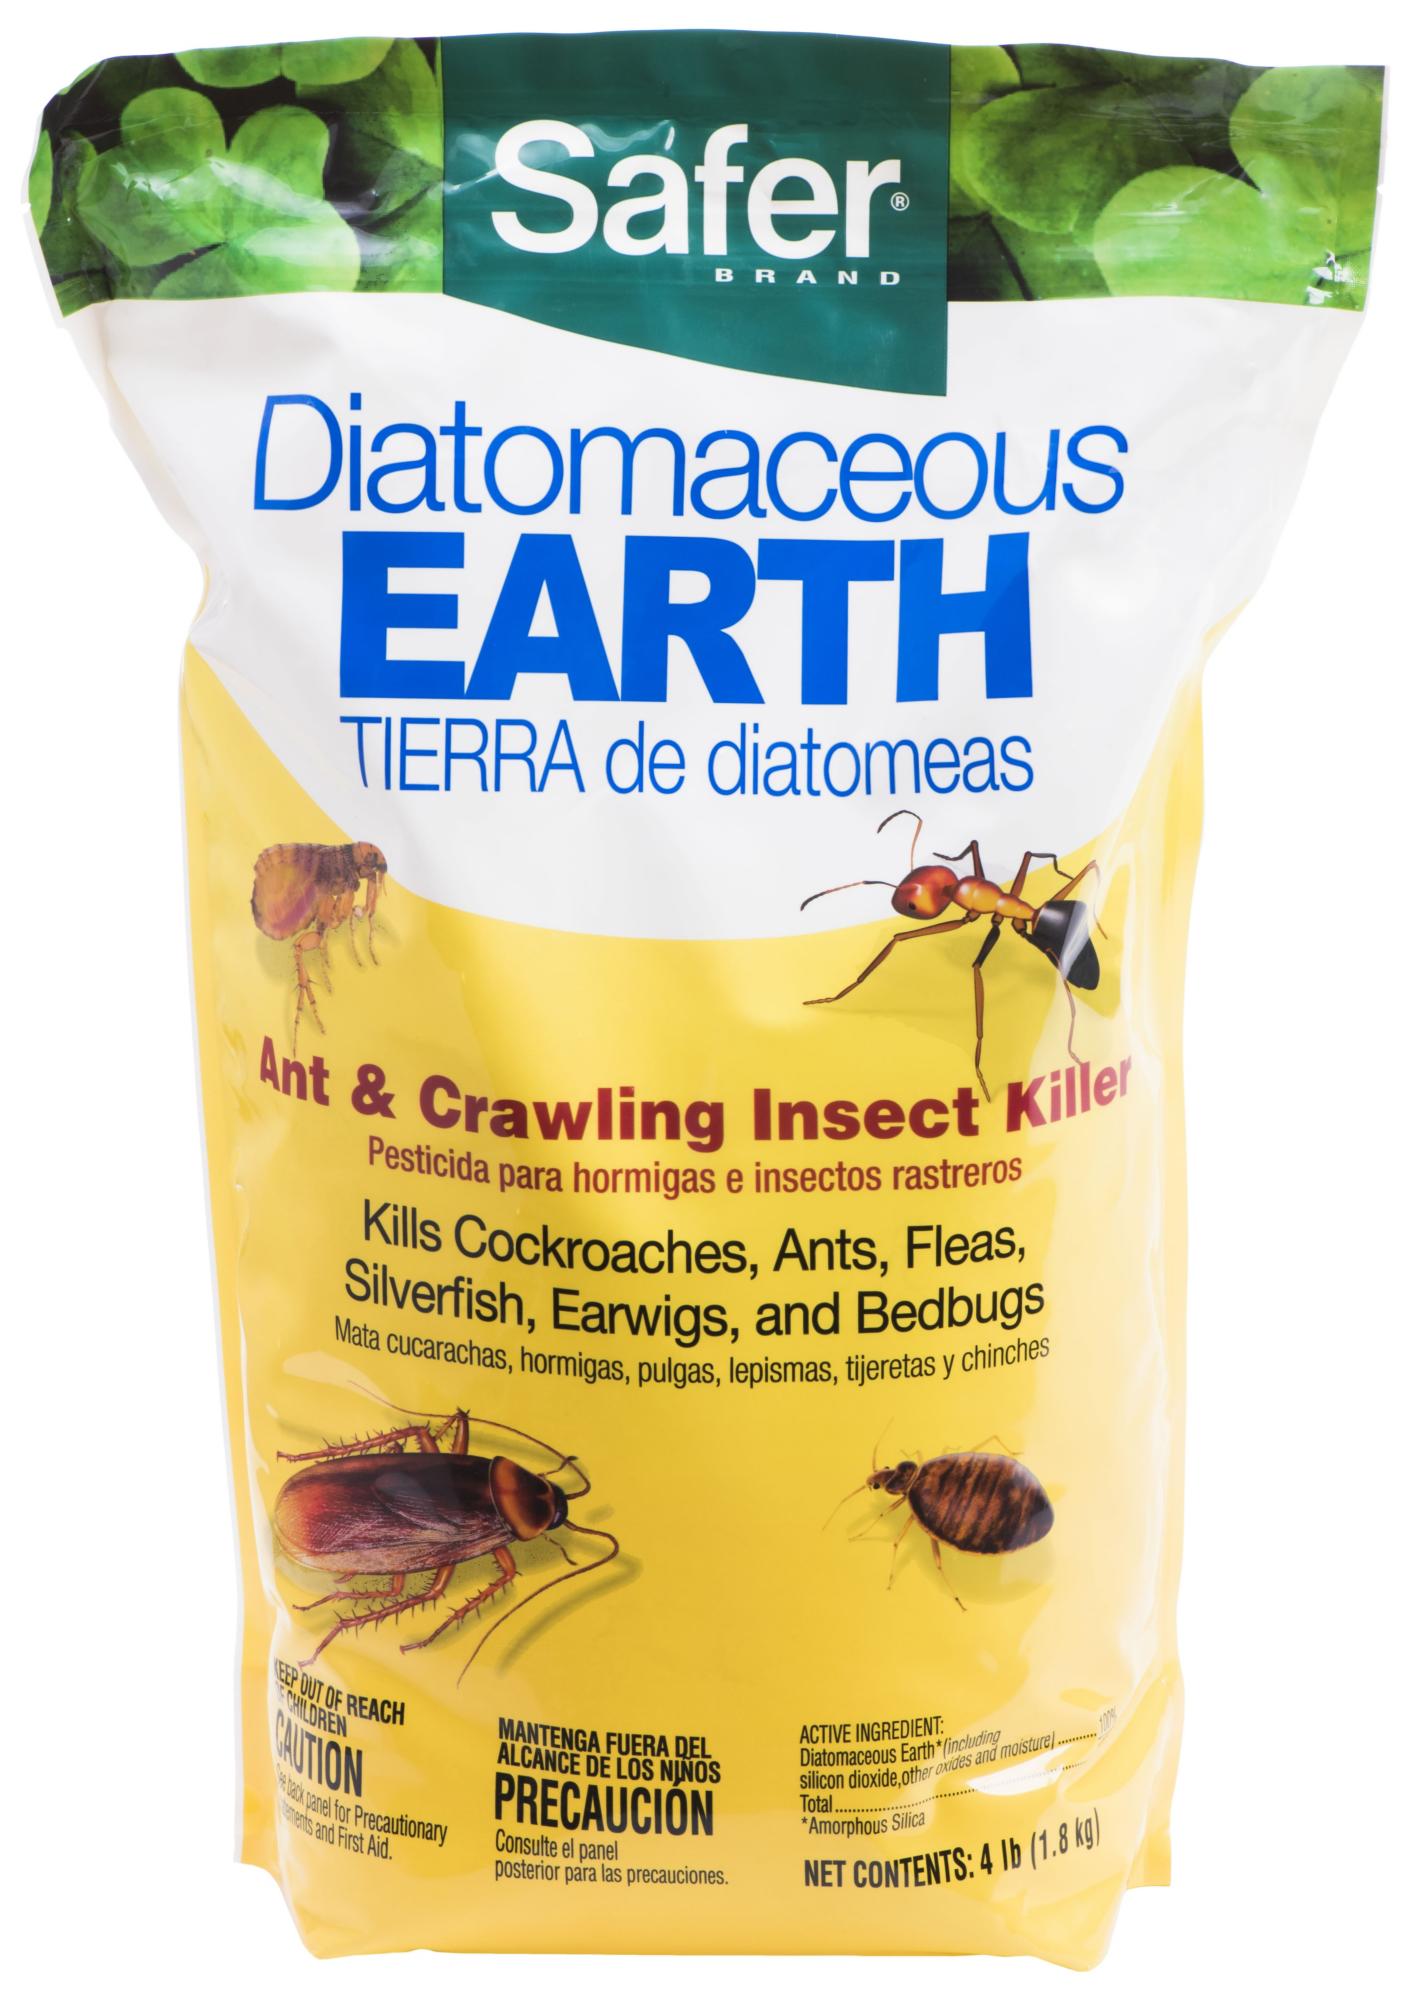 Diatomaceous Earth Bed Bugs Fleas Ants Other Crawling.